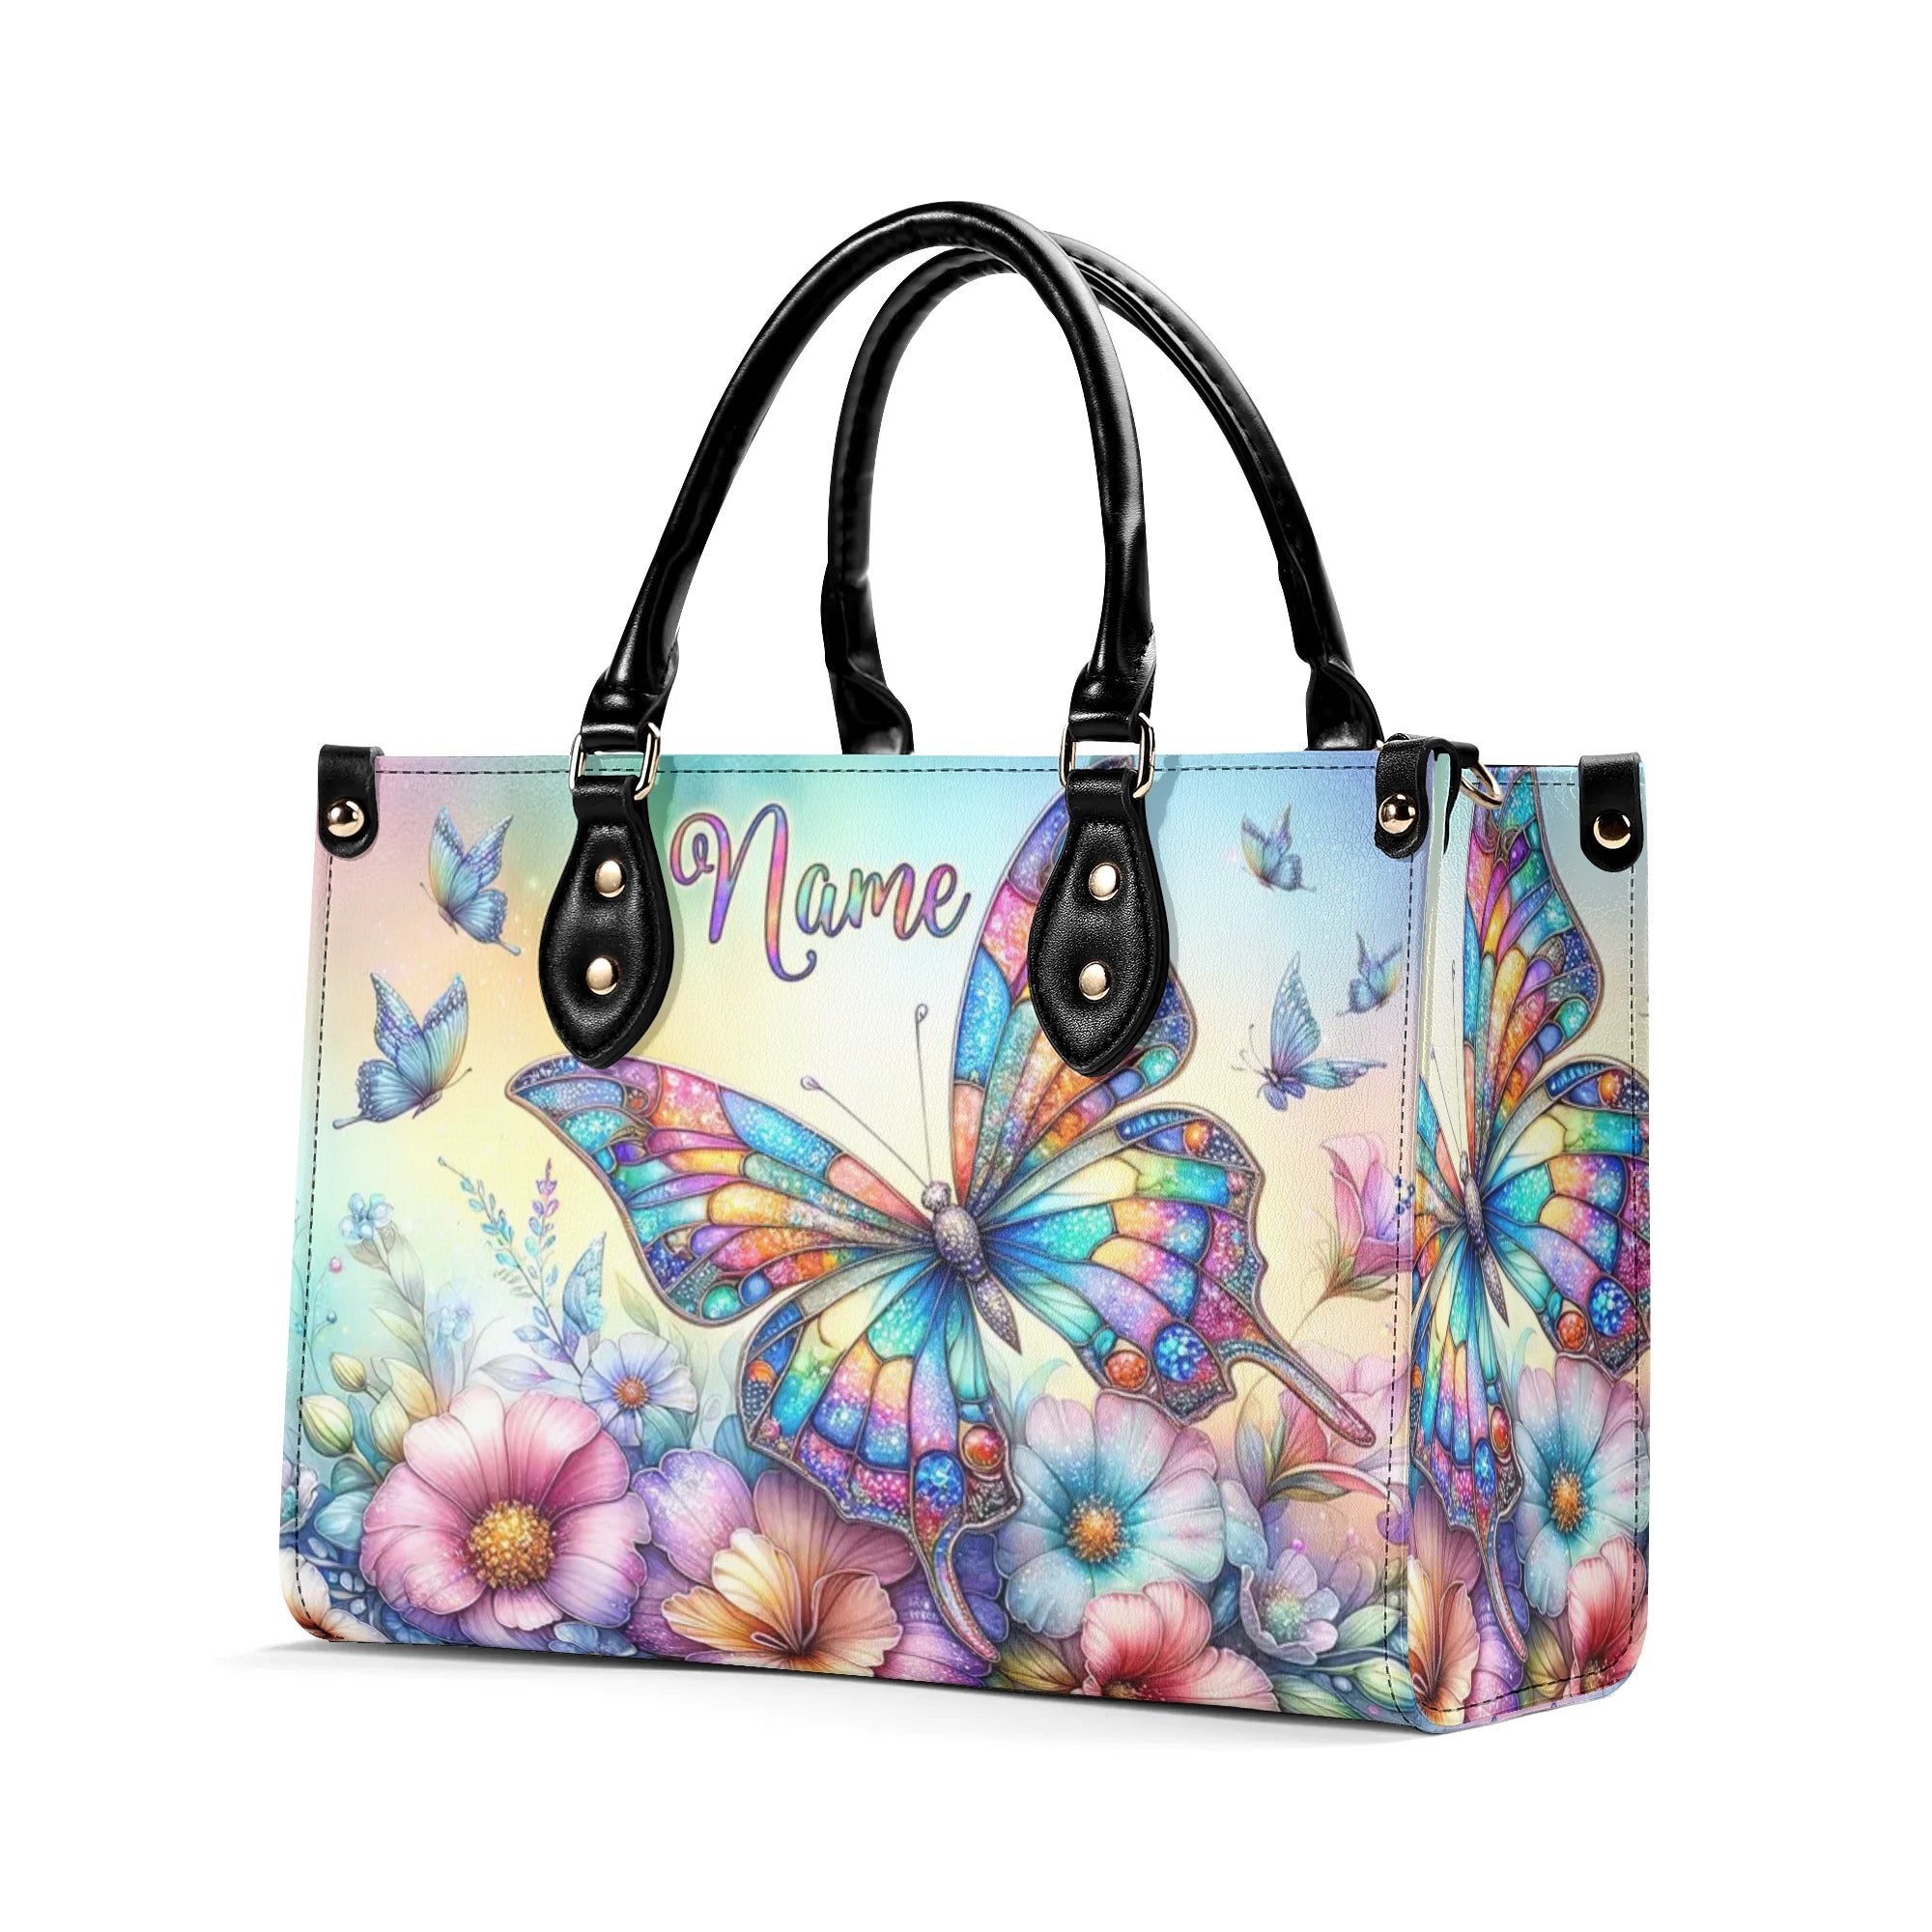 BUTTERFLY FLORAL LEATHER HANDBAG - TLNZ2606245